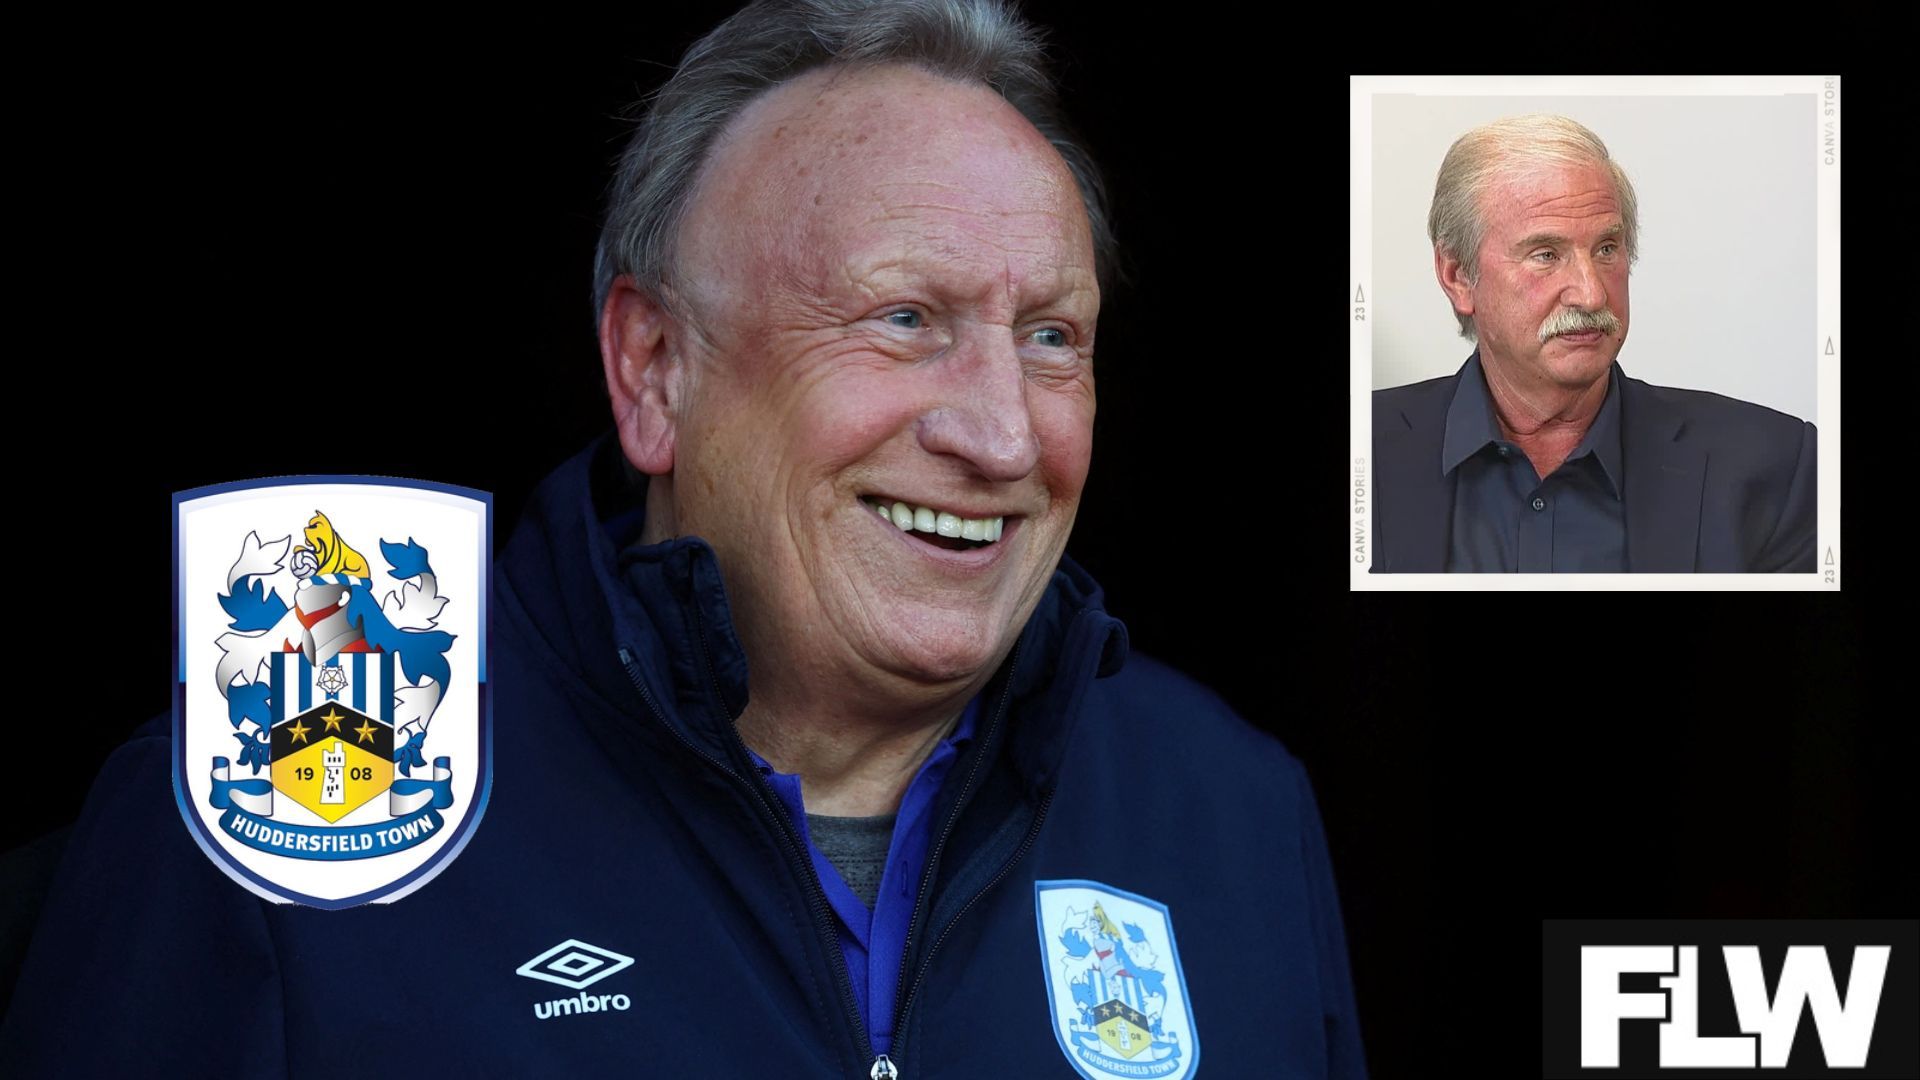 Neil Warnock remains contracted at Huddersfield Town